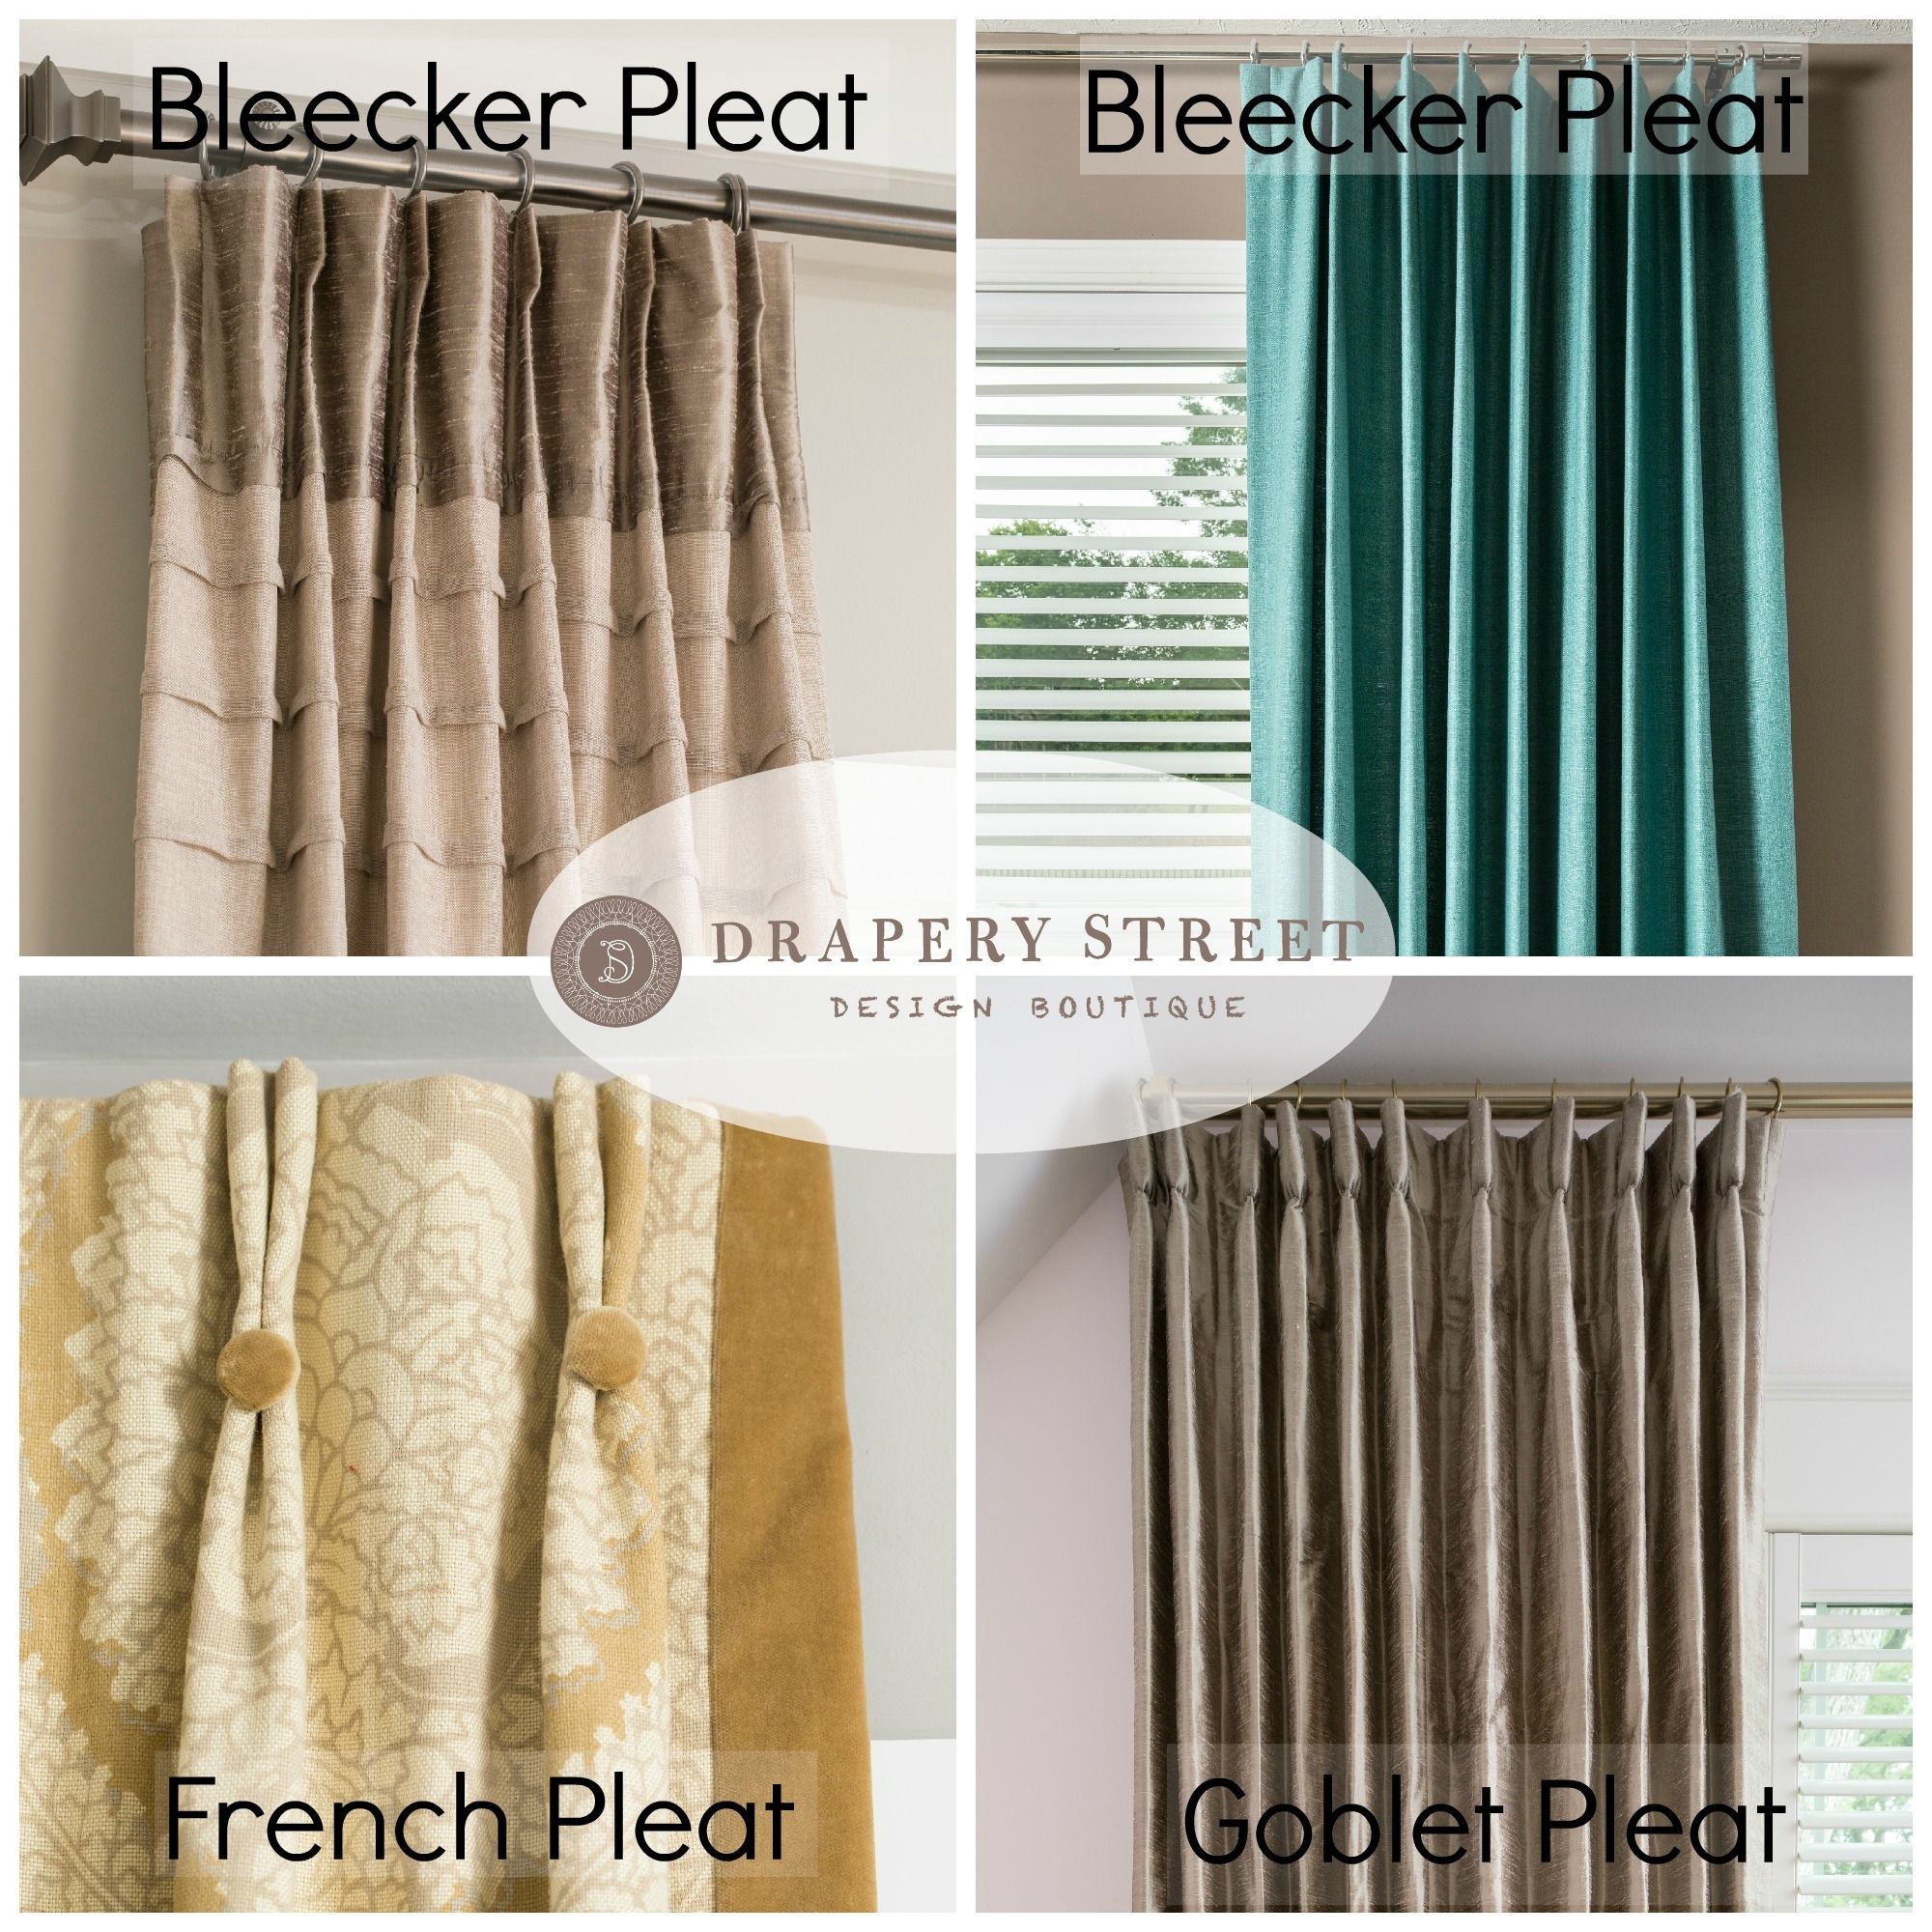 Top 3 Most Popular Drapery Pleat Styles Drapery Street In Curtains Pleated Style (View 5 of 15)